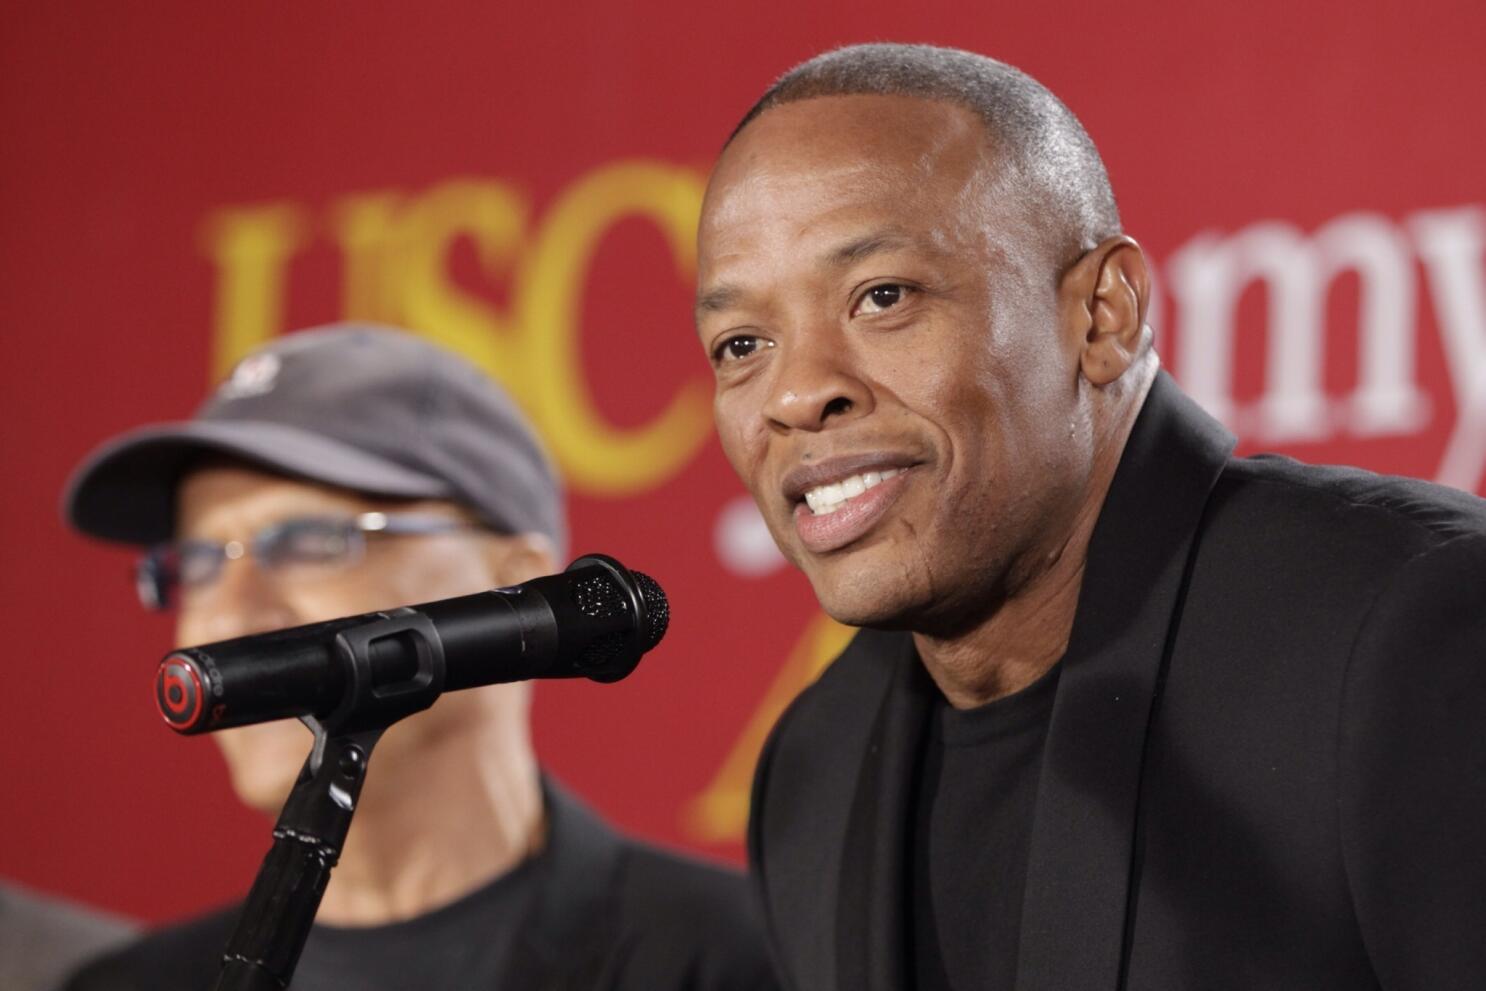 Why USC and not a black college, Dr. Dre? - Los Angeles Times